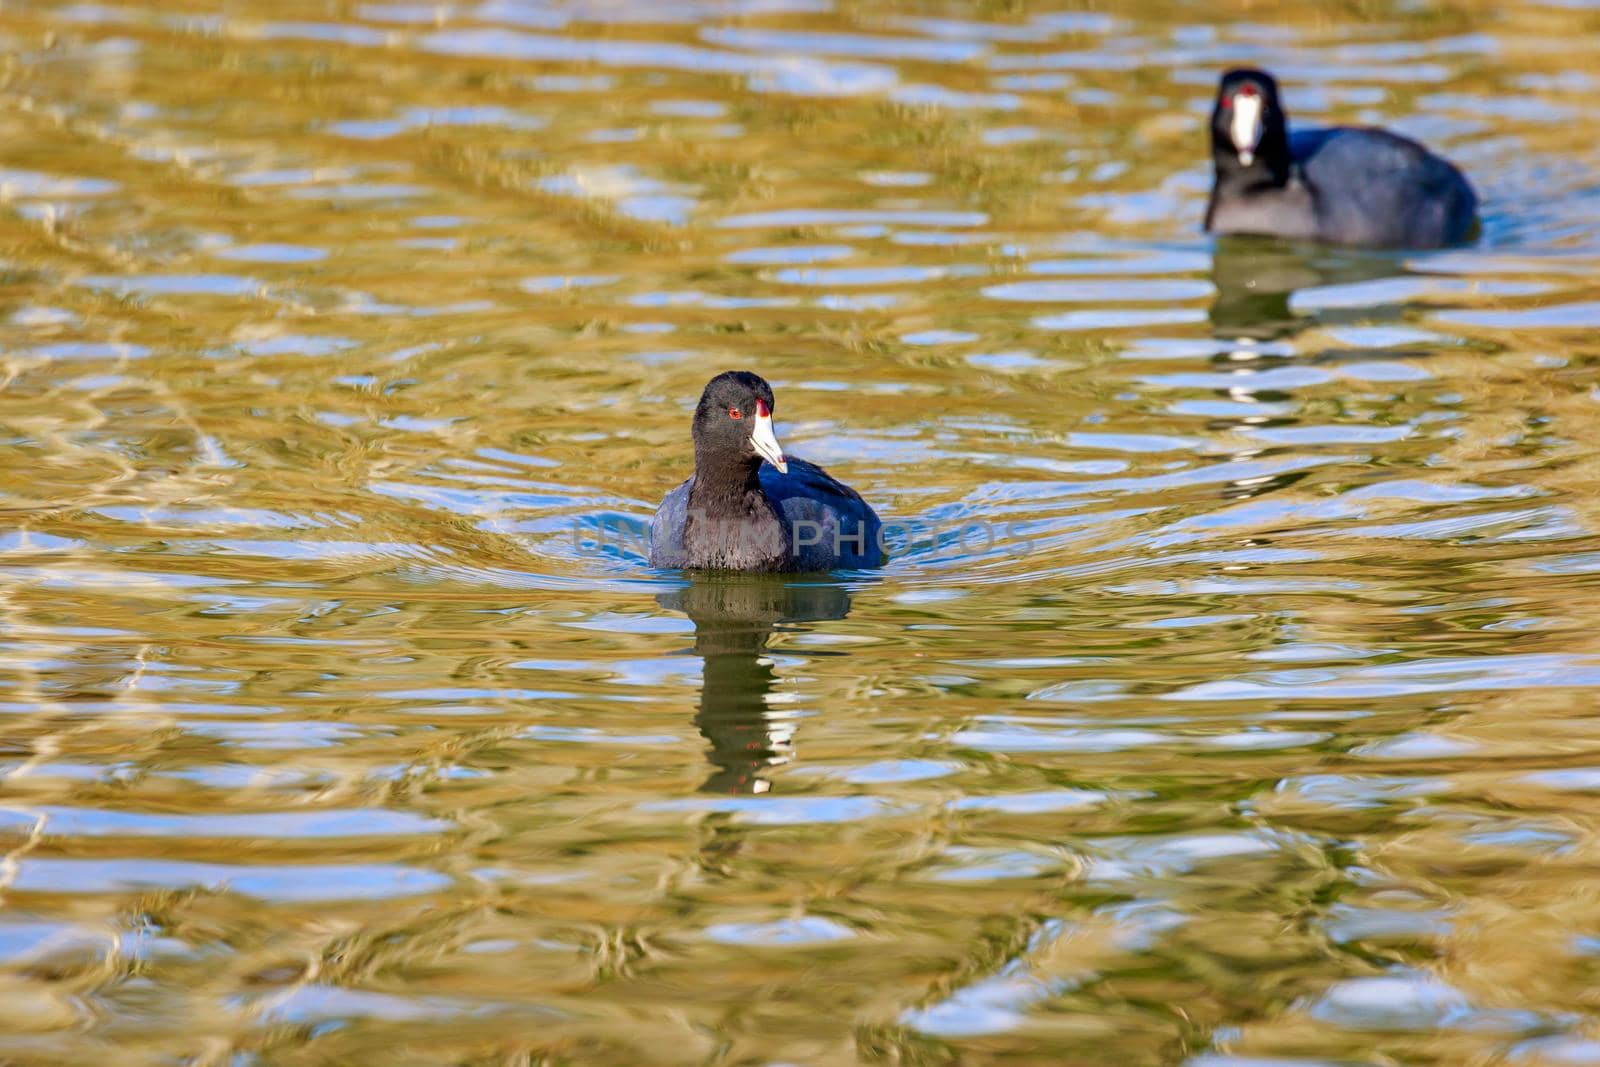 American Coot swim in the lake, with reflection in water.